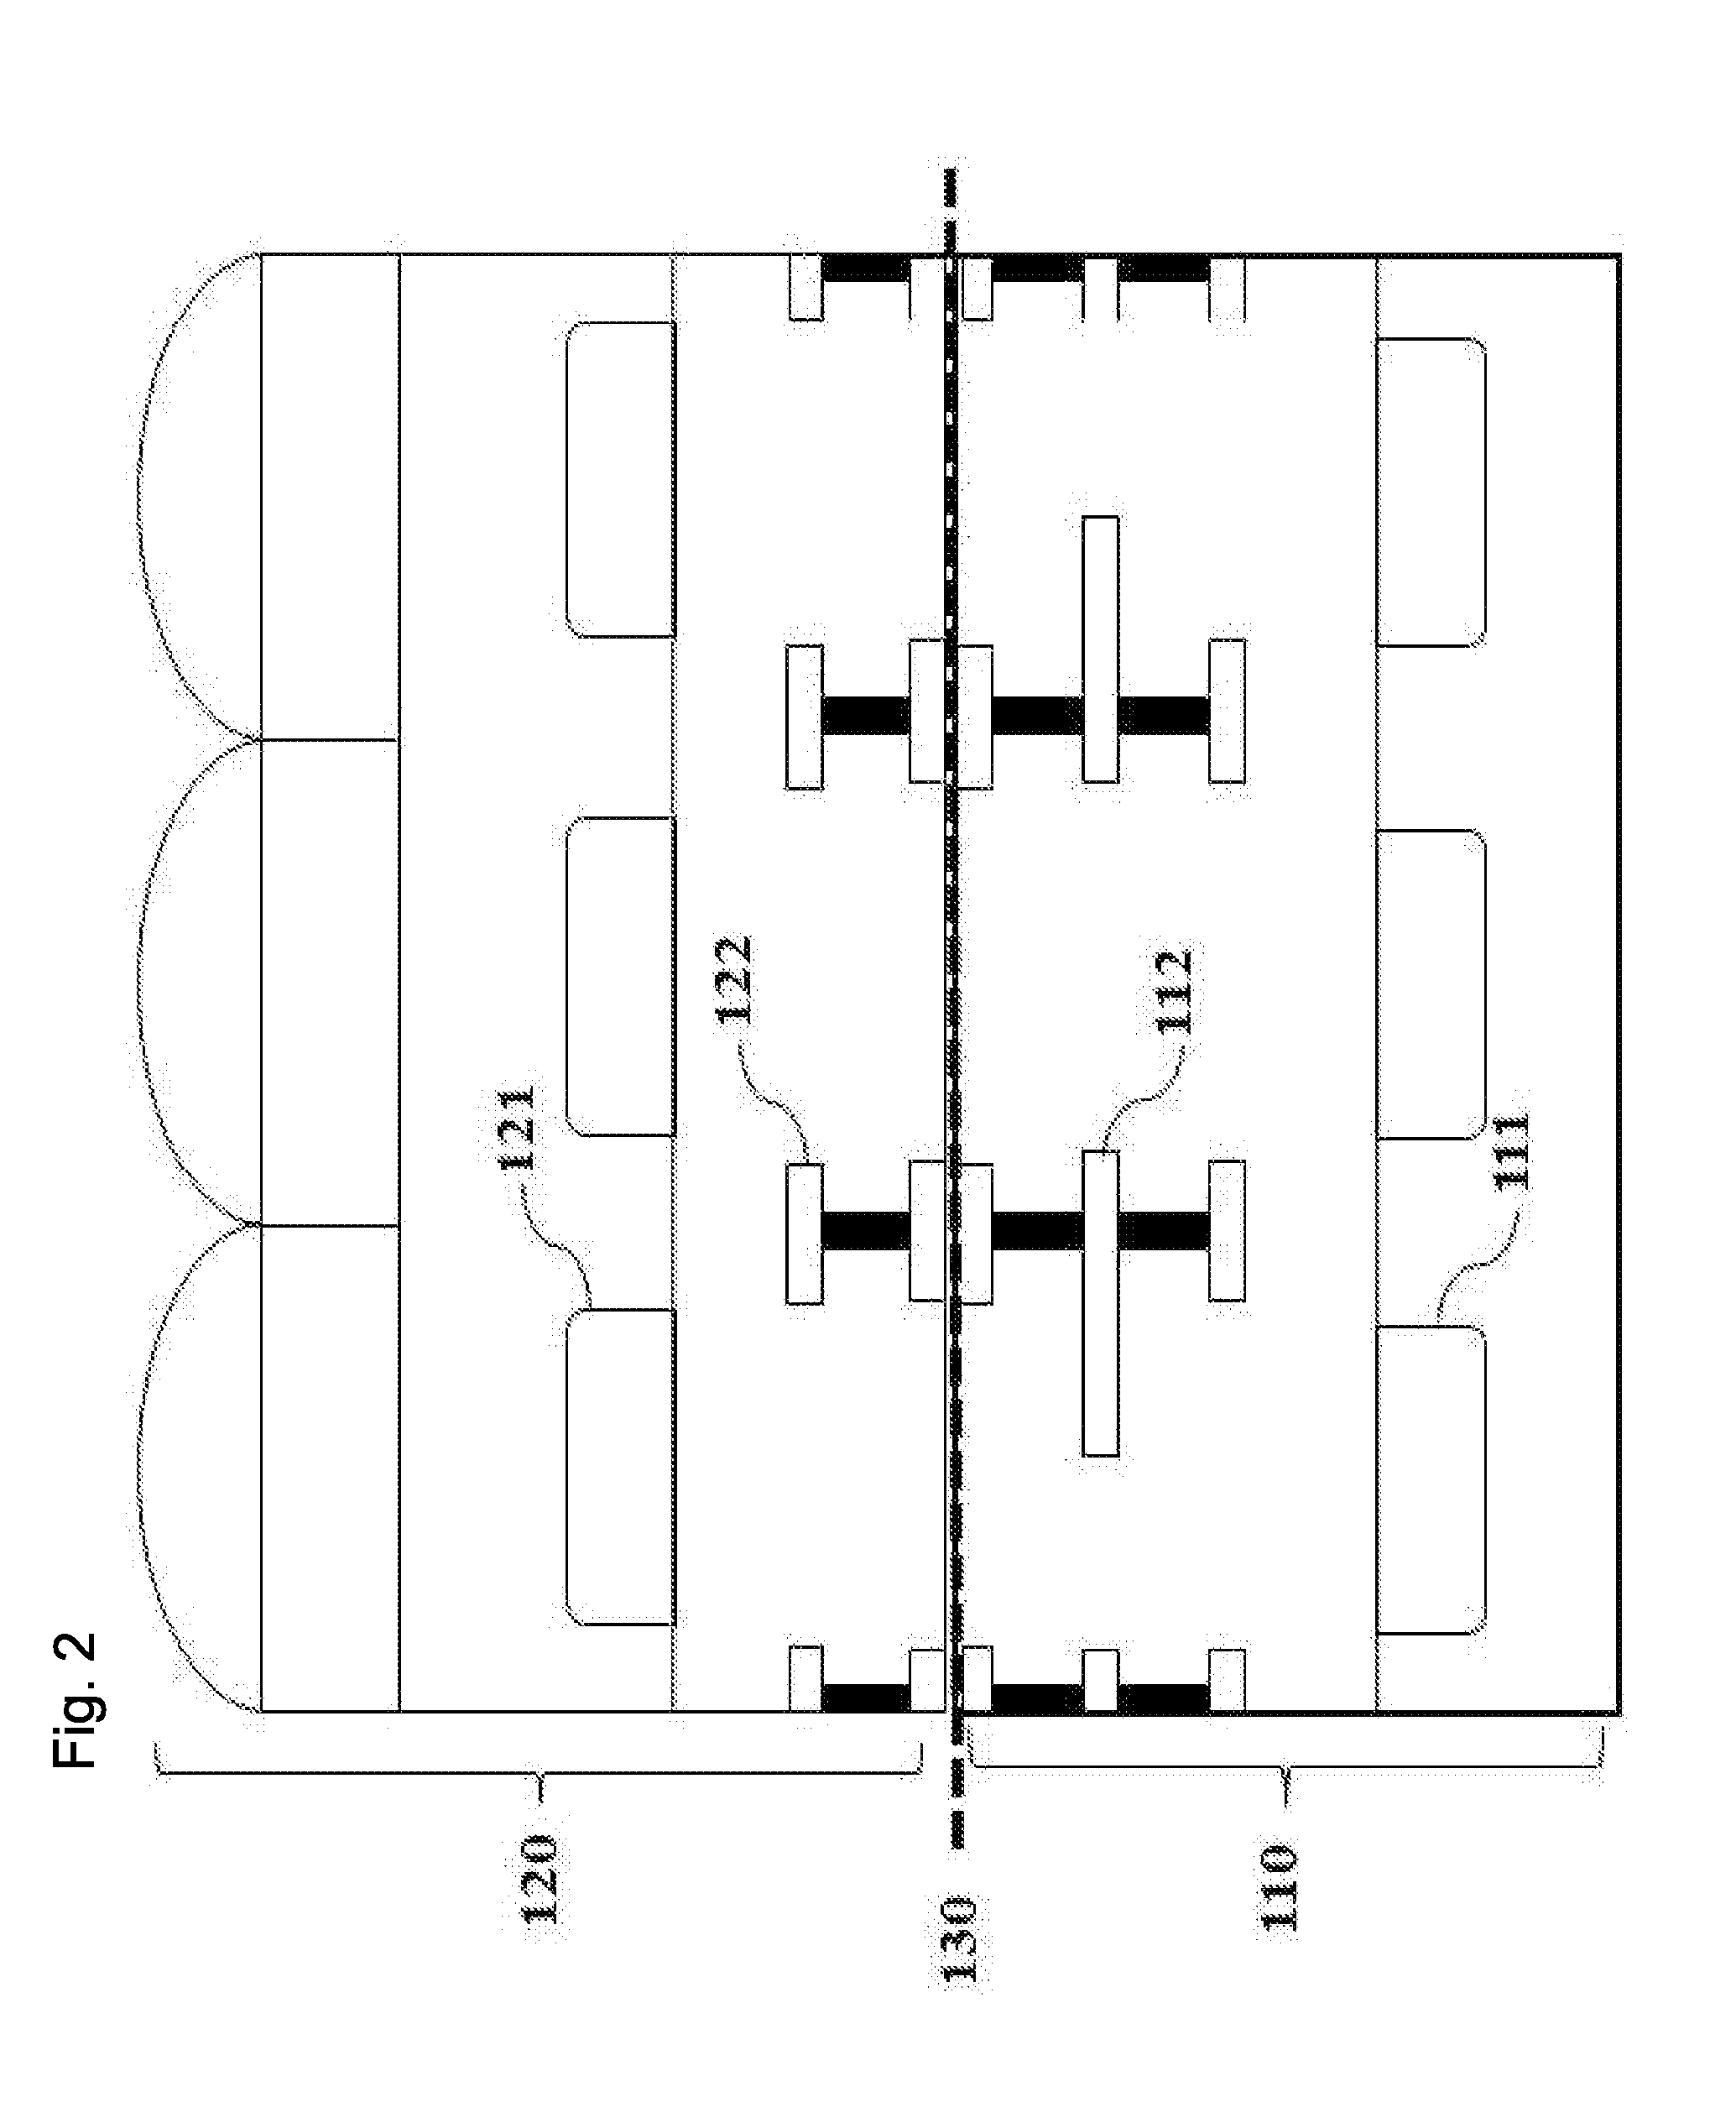 Image sensor with 3D stack structure